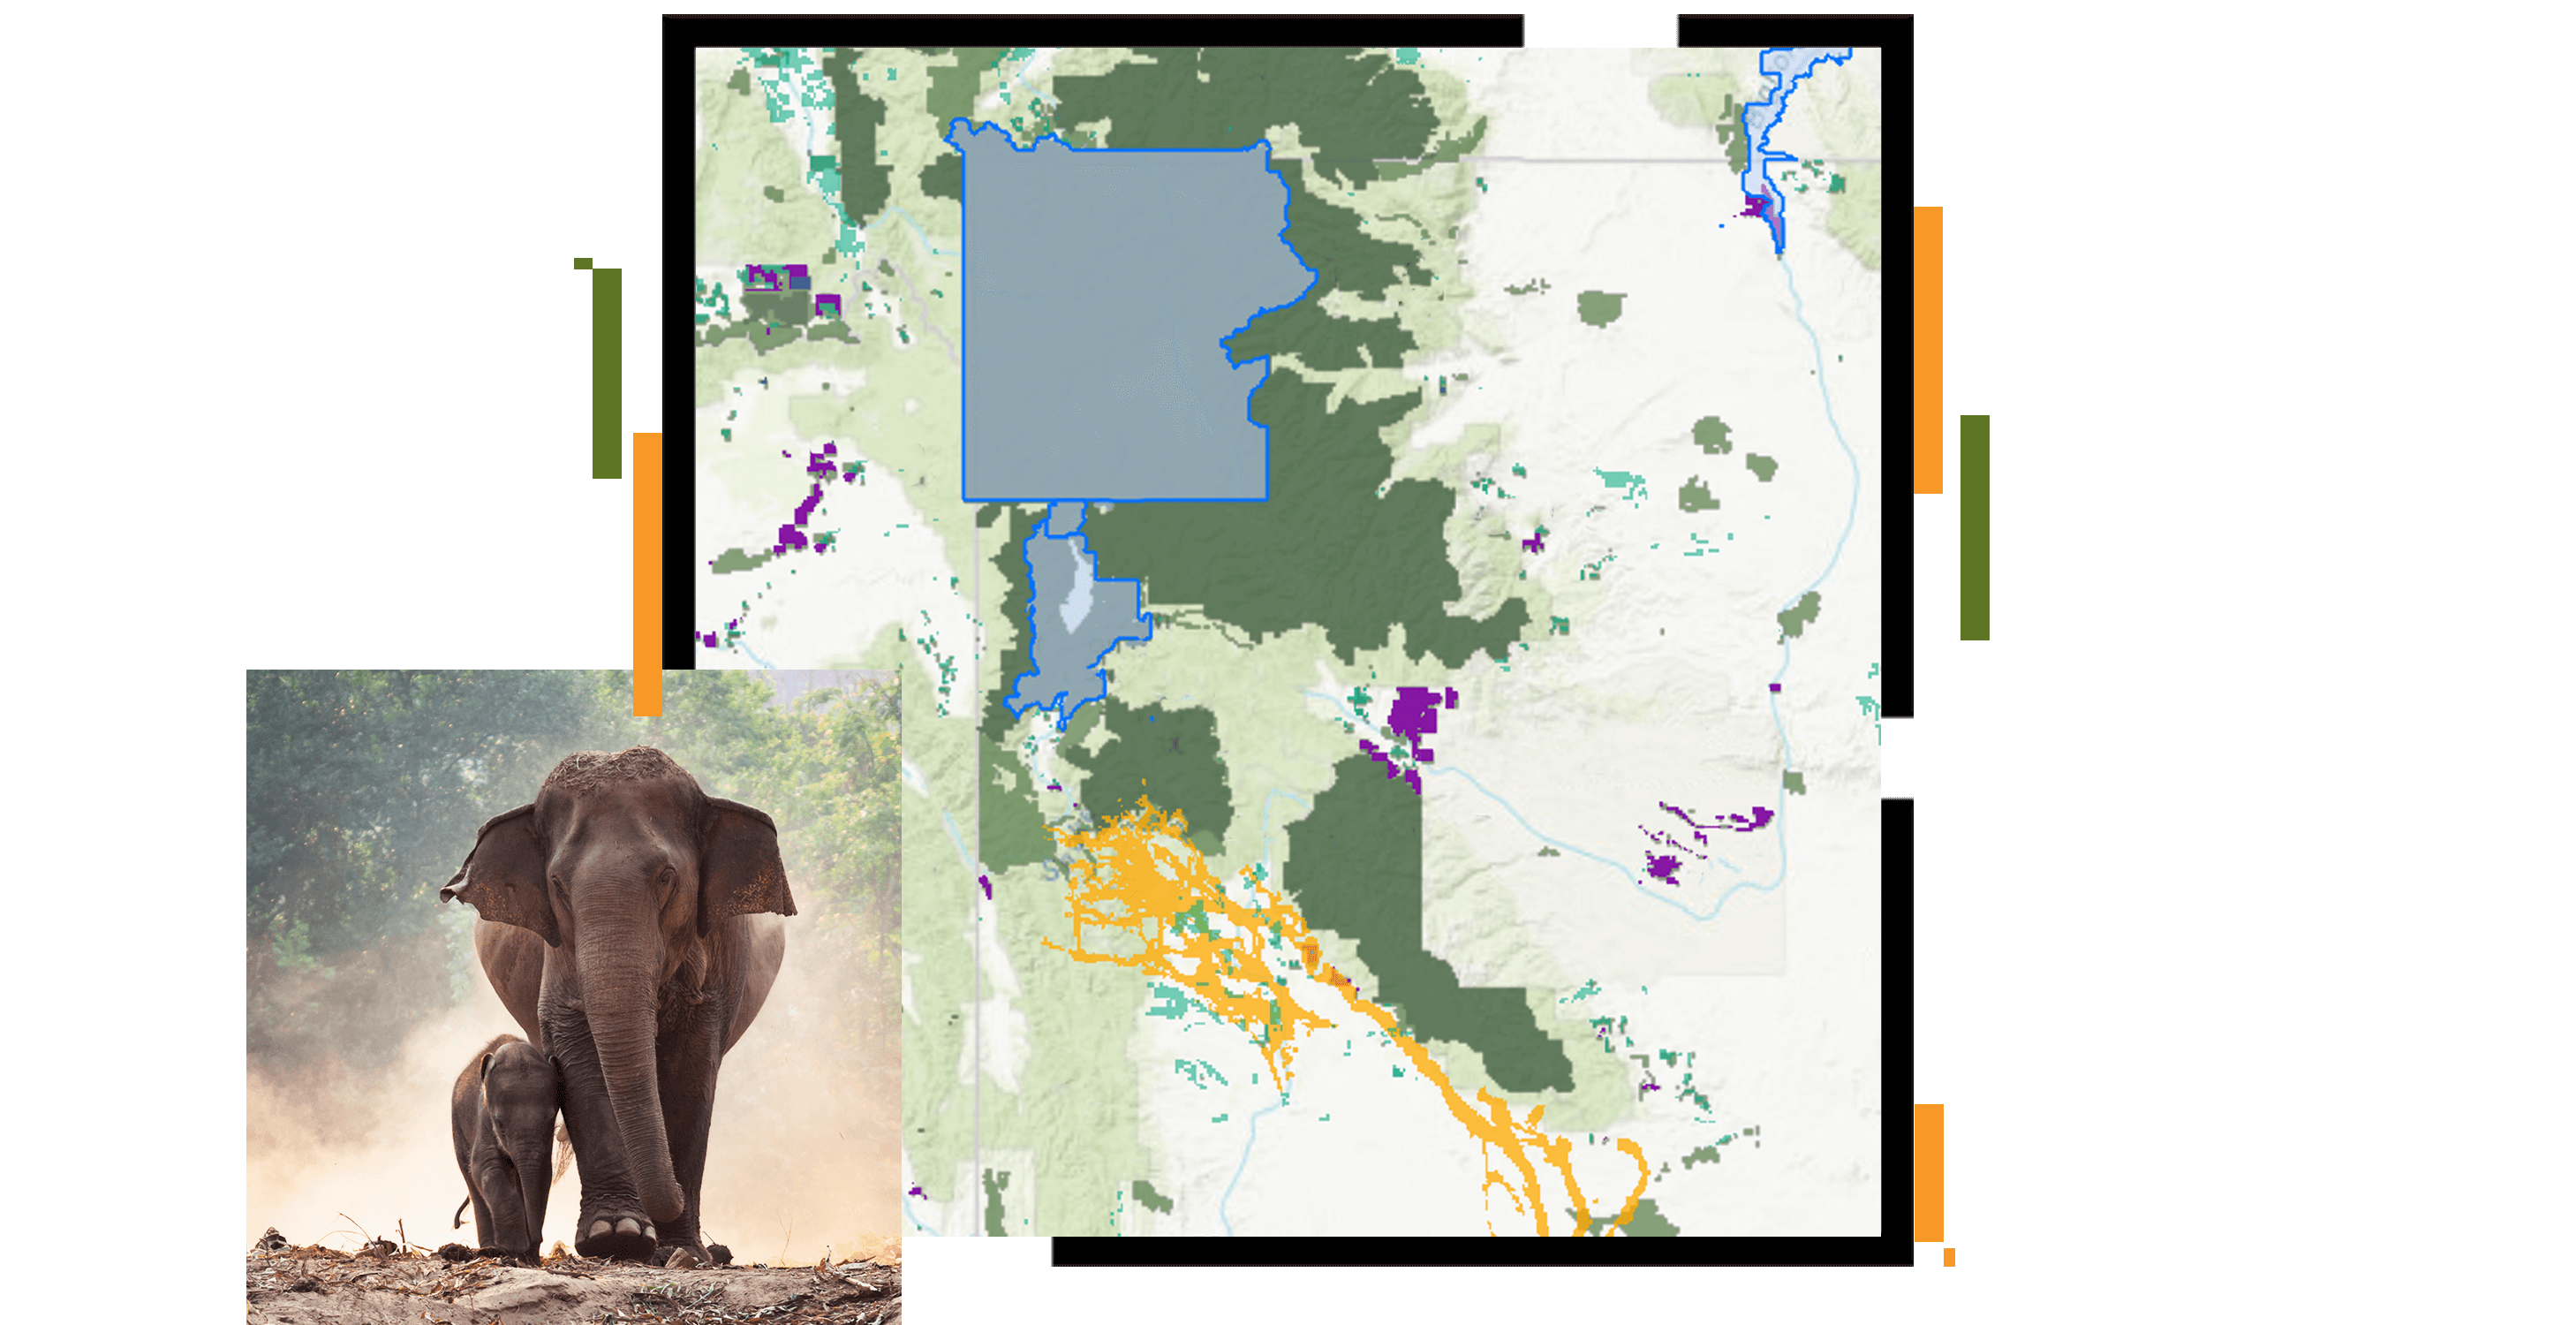 Adult and baby elephants walking together, map of conservation land